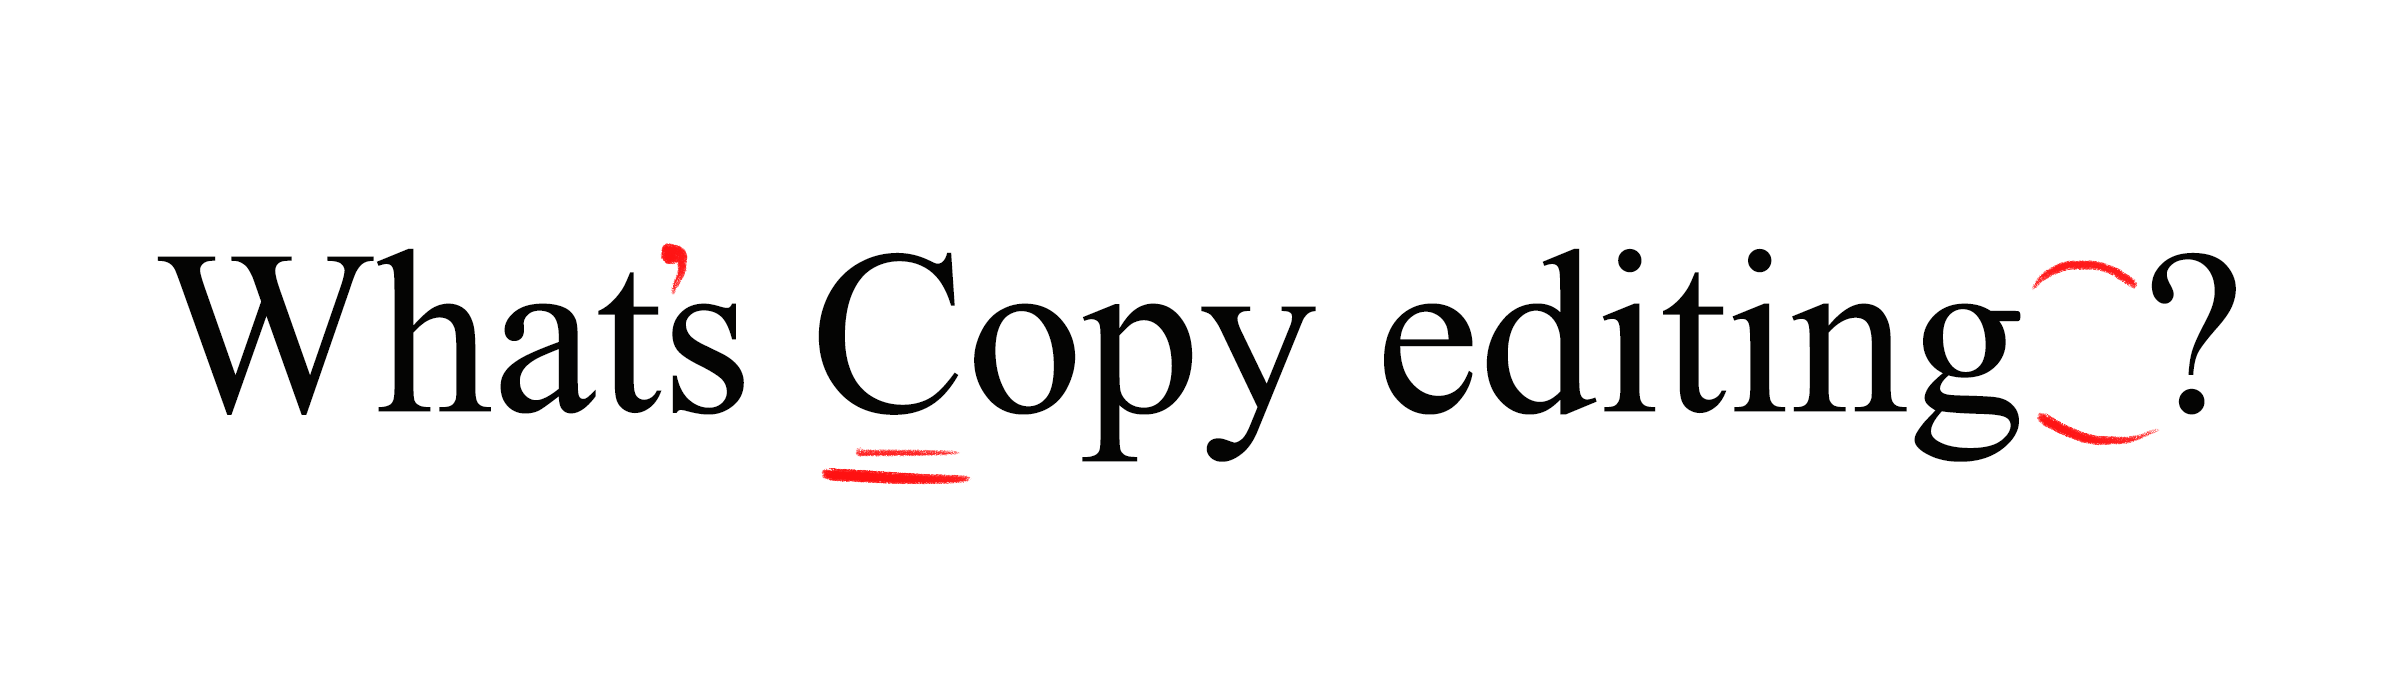 Copy editing and proofreading: what’s the difference? 